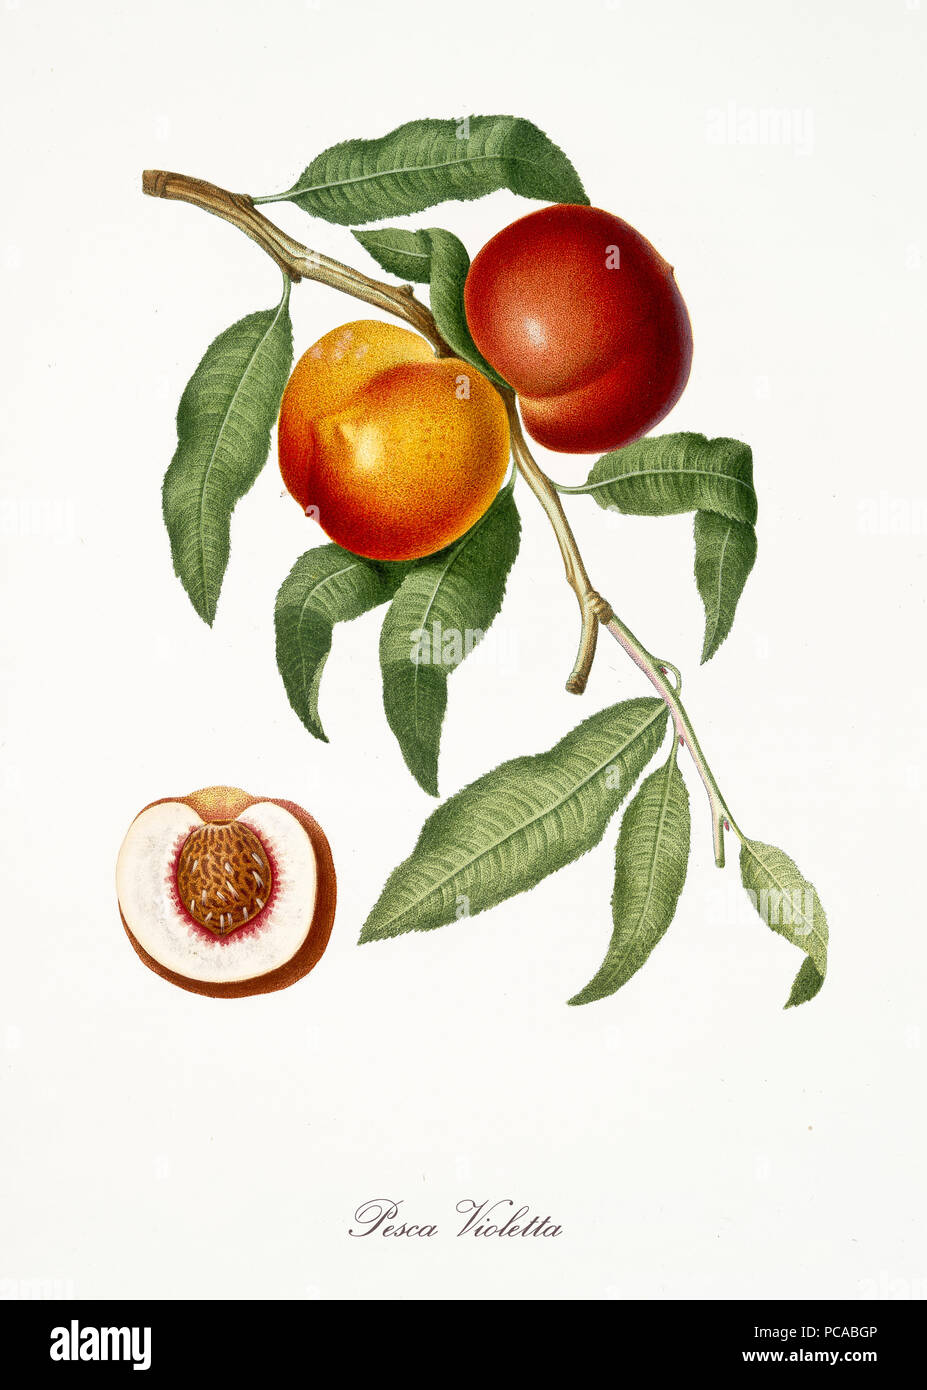 Peach, also known as violet Peach, peach tree leaves and fruit section with kernel isolated on white background. Old botanical detailed illustration By Giorgio Gallesio publ. 1817, 1839 Pisa Italy Stock Photo